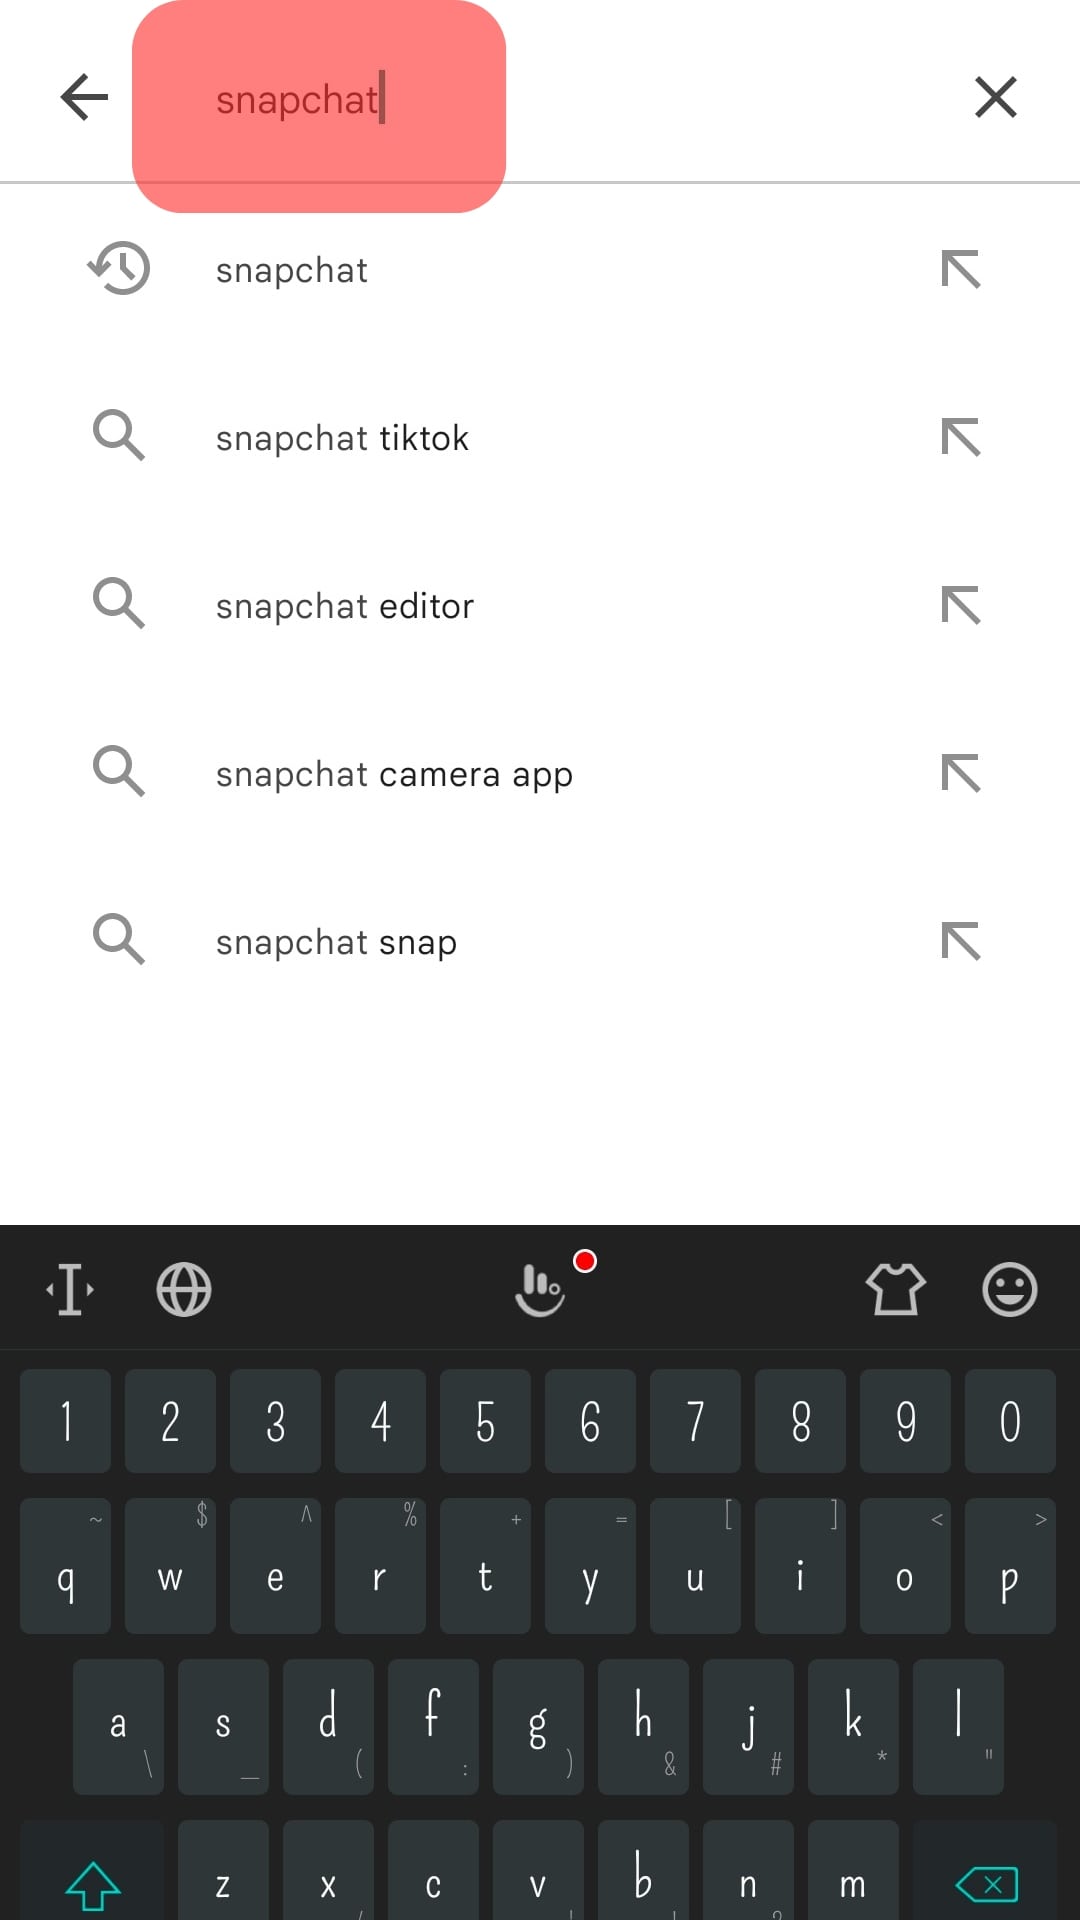 Search For Snapchat In Playstore Search Bar